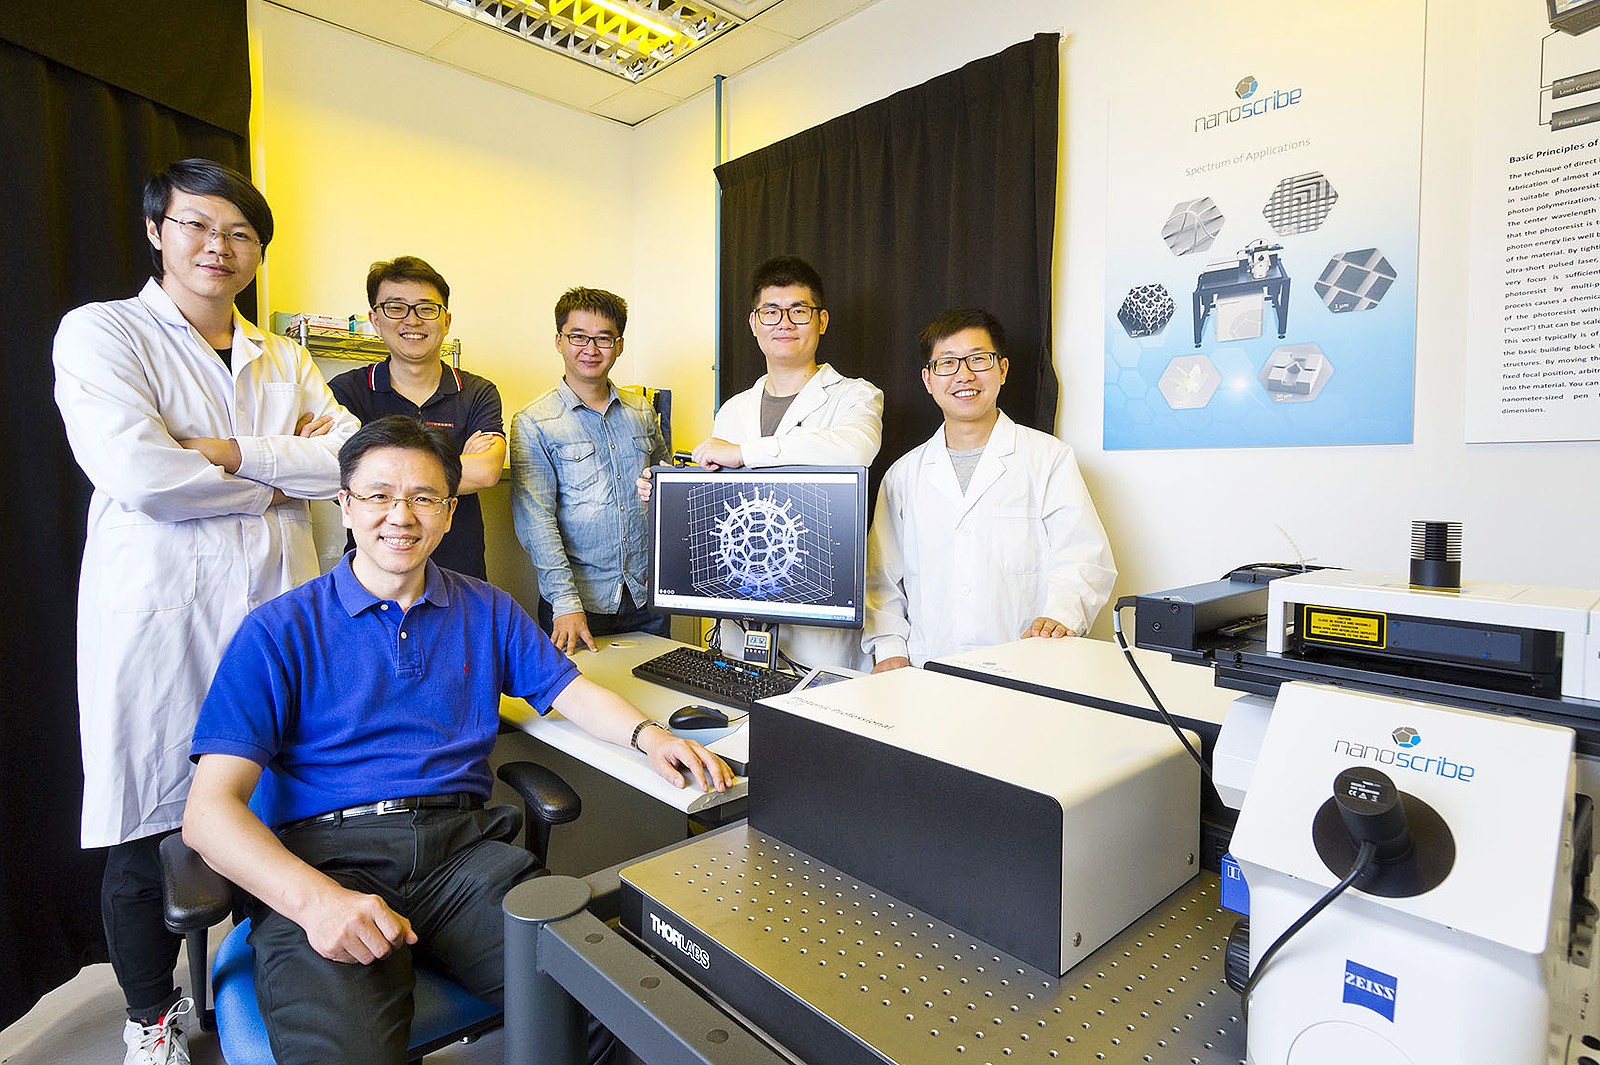 Led by the Department of Biomedical Engineering at City University of Hong Kong, researchers in this project include Professor Sun Dong (front row) and (back row from left) Mr Li Dongfang, Dr Li Junyang, Dr Li Xiaojian, Dr Chen Shuxun and Mr Luo Tao.